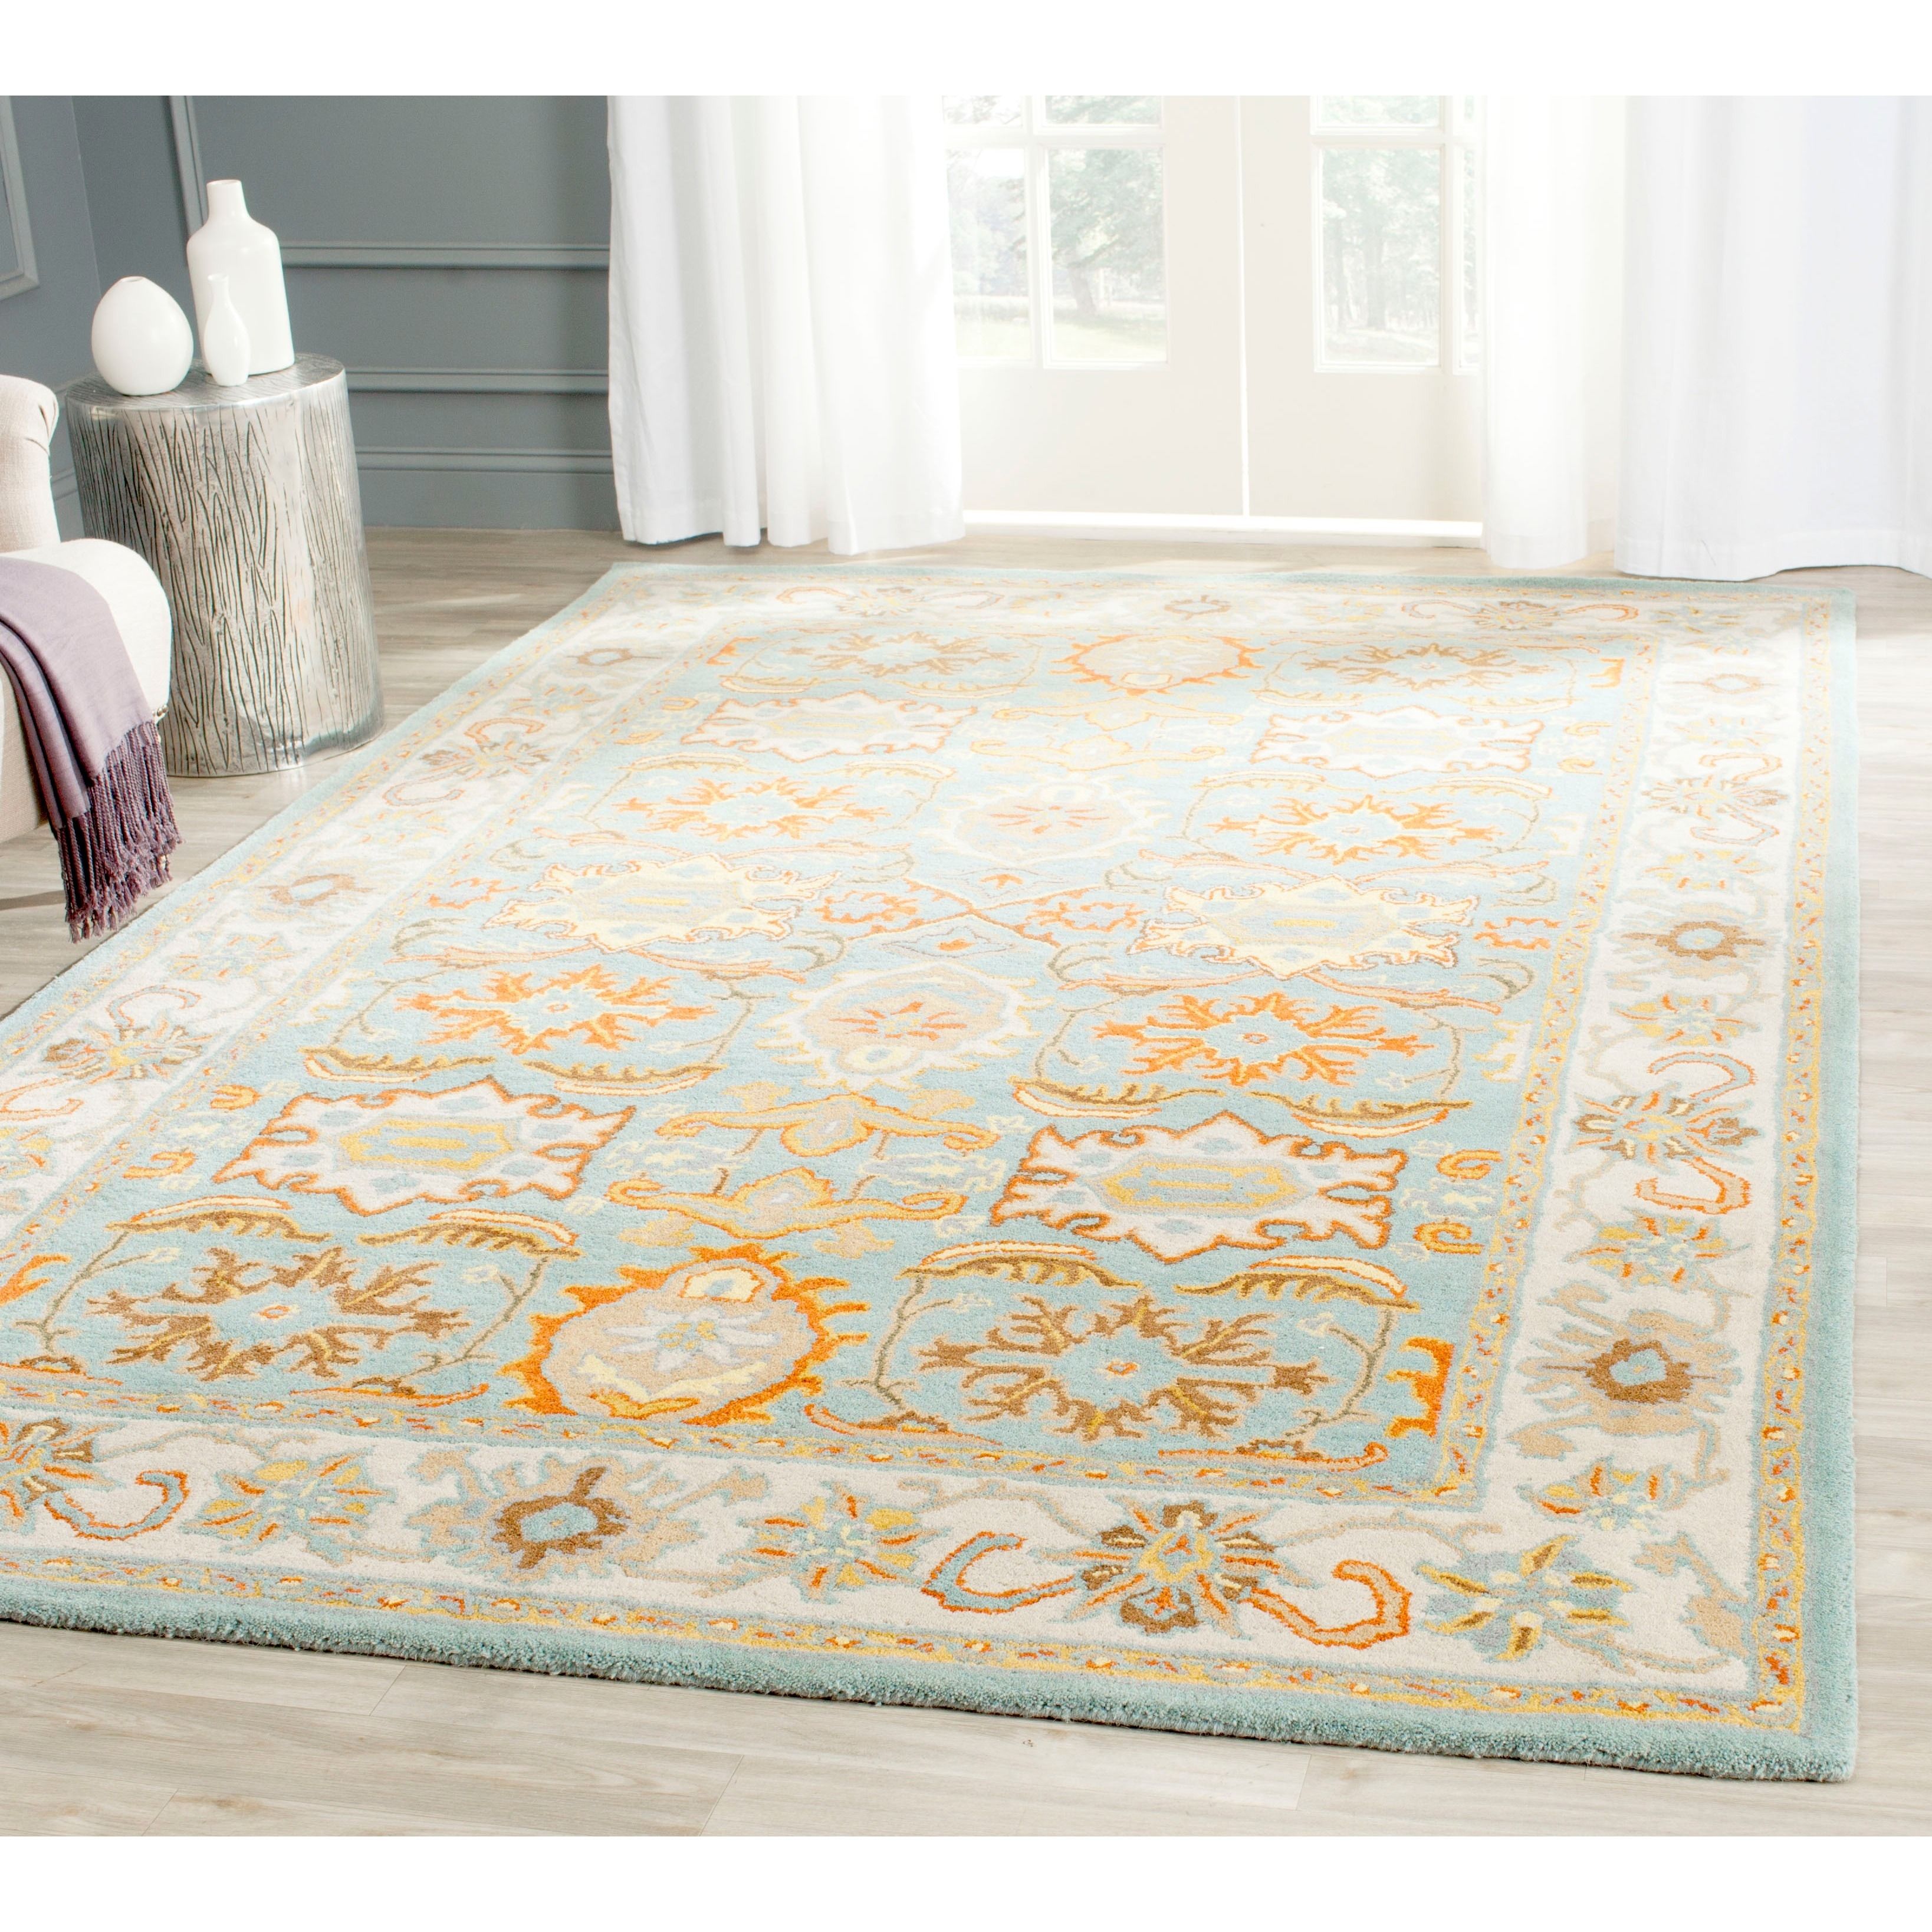 Rugs Cozy 4×6 Area Rugs For Your Interior Floor Accessories Ideas For Wool Area Rugs 4× (View 2 of 15)